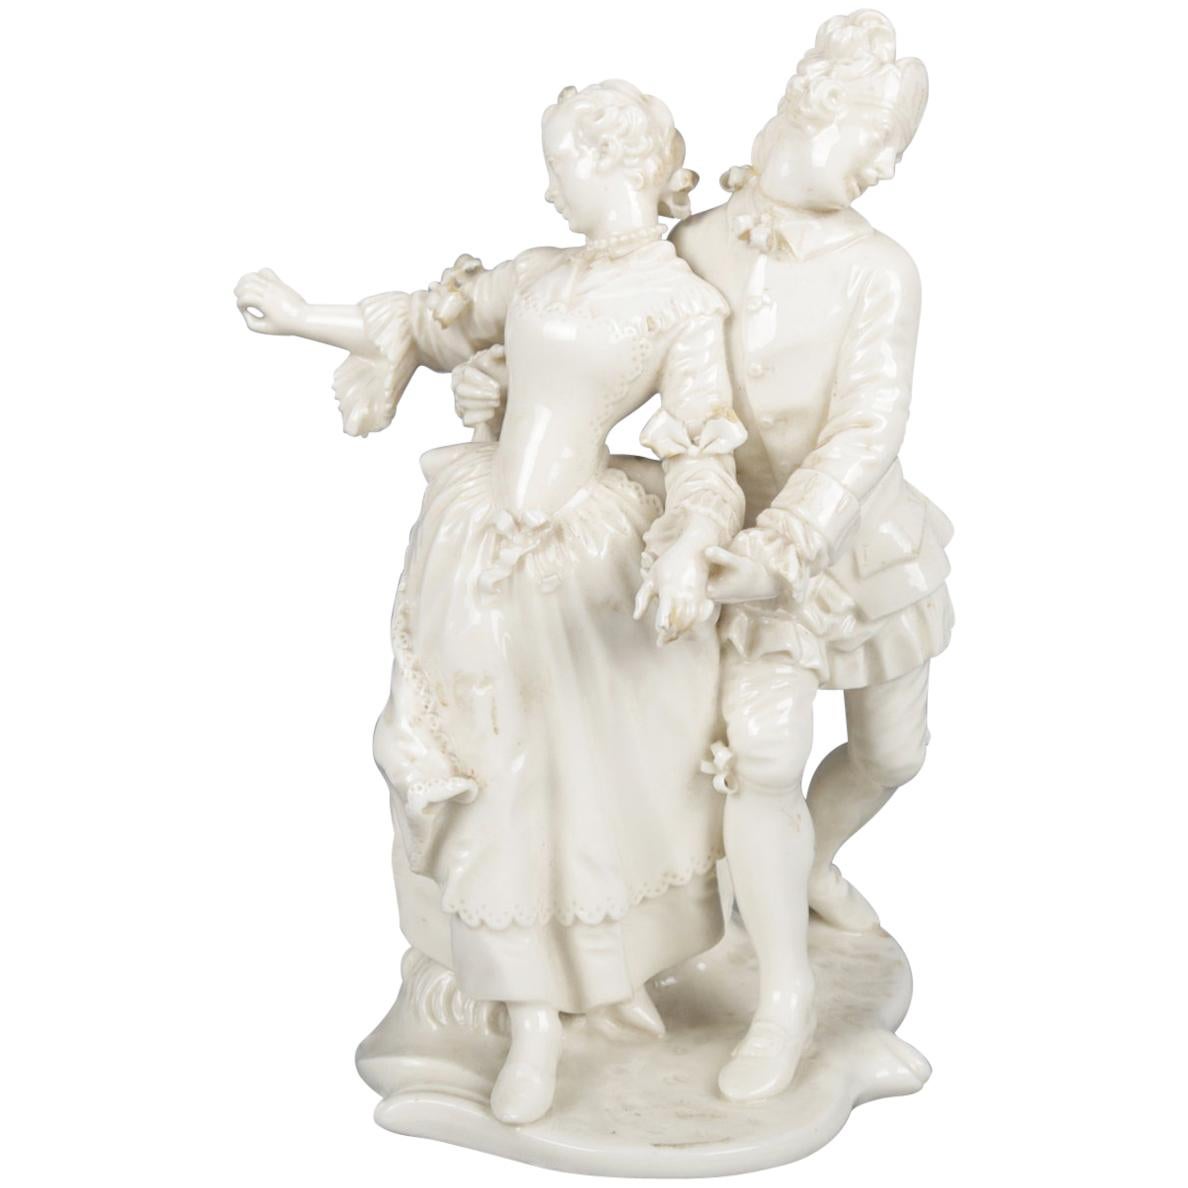 Antique & Petite German Figural Blanc de Chine Grouping, Dancing Courting Couple